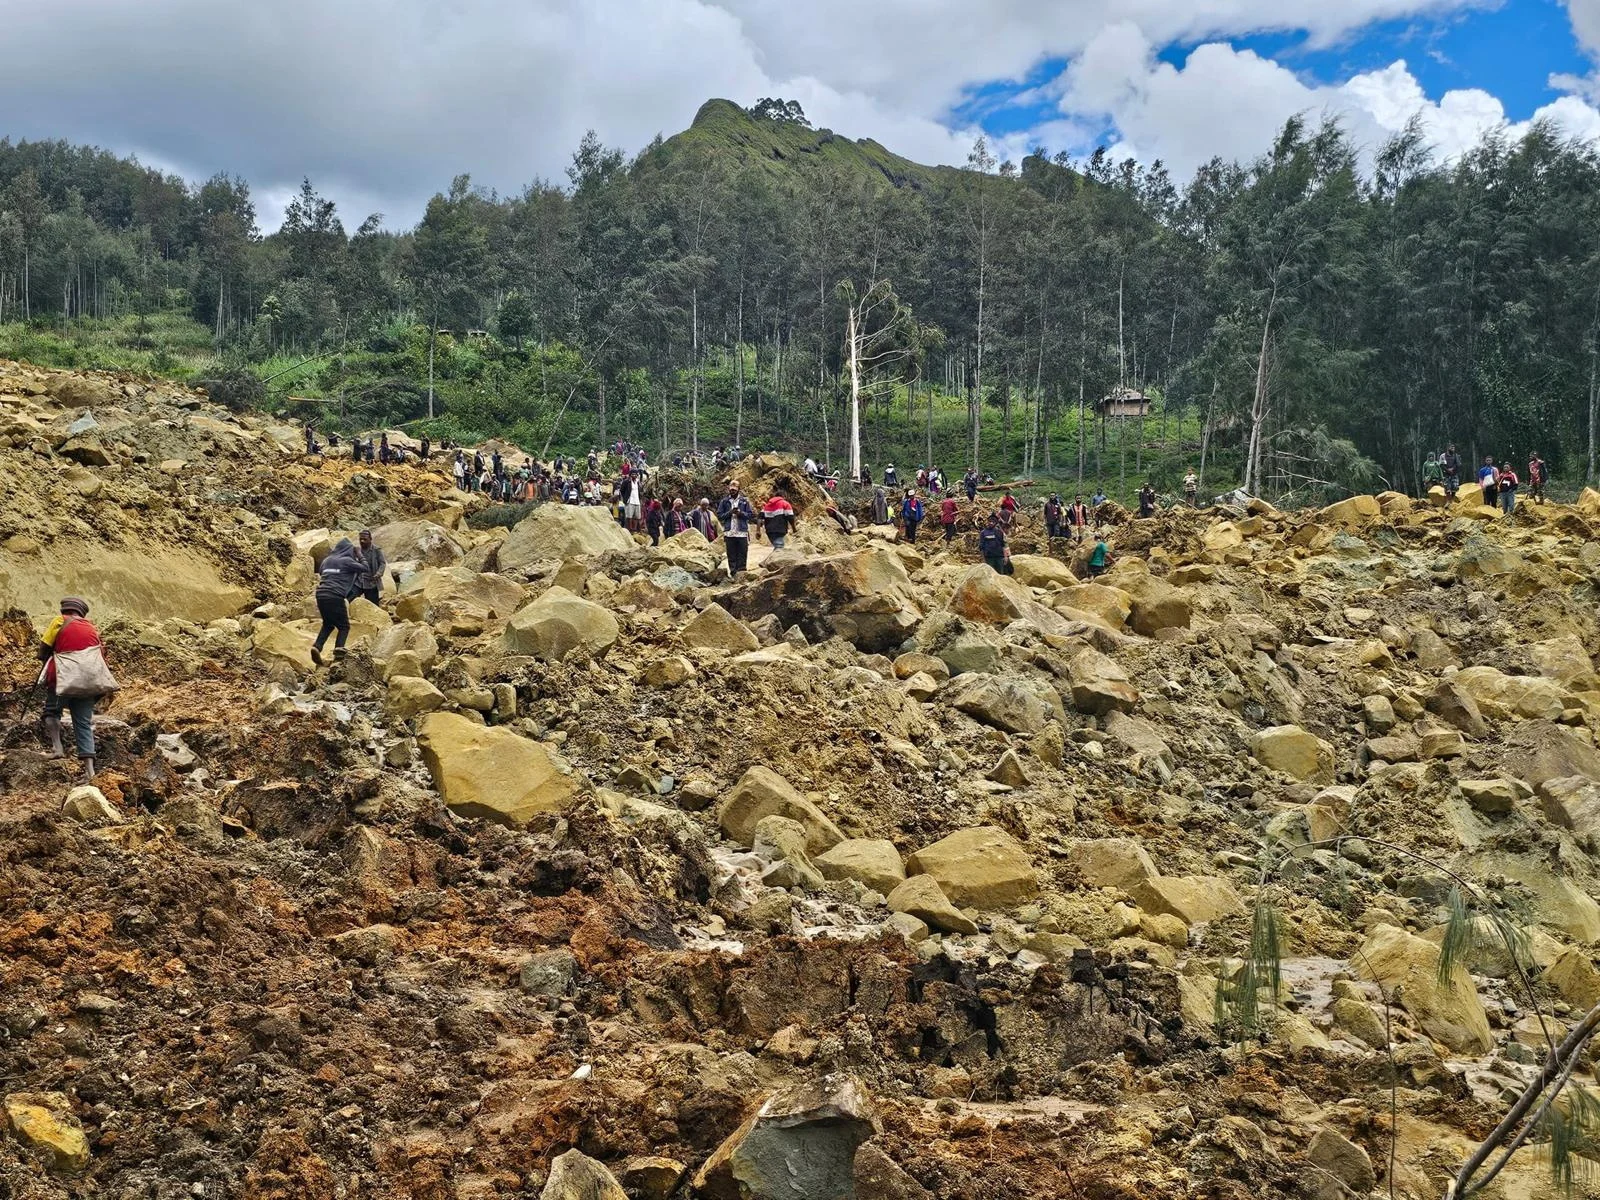 REUTERS: View of the damage after a landslide in Maip Mulitaka, Enga province, Papua New Guinea May 24, 2024 in this obtained image. Emmanuel Eralia via REUTERS